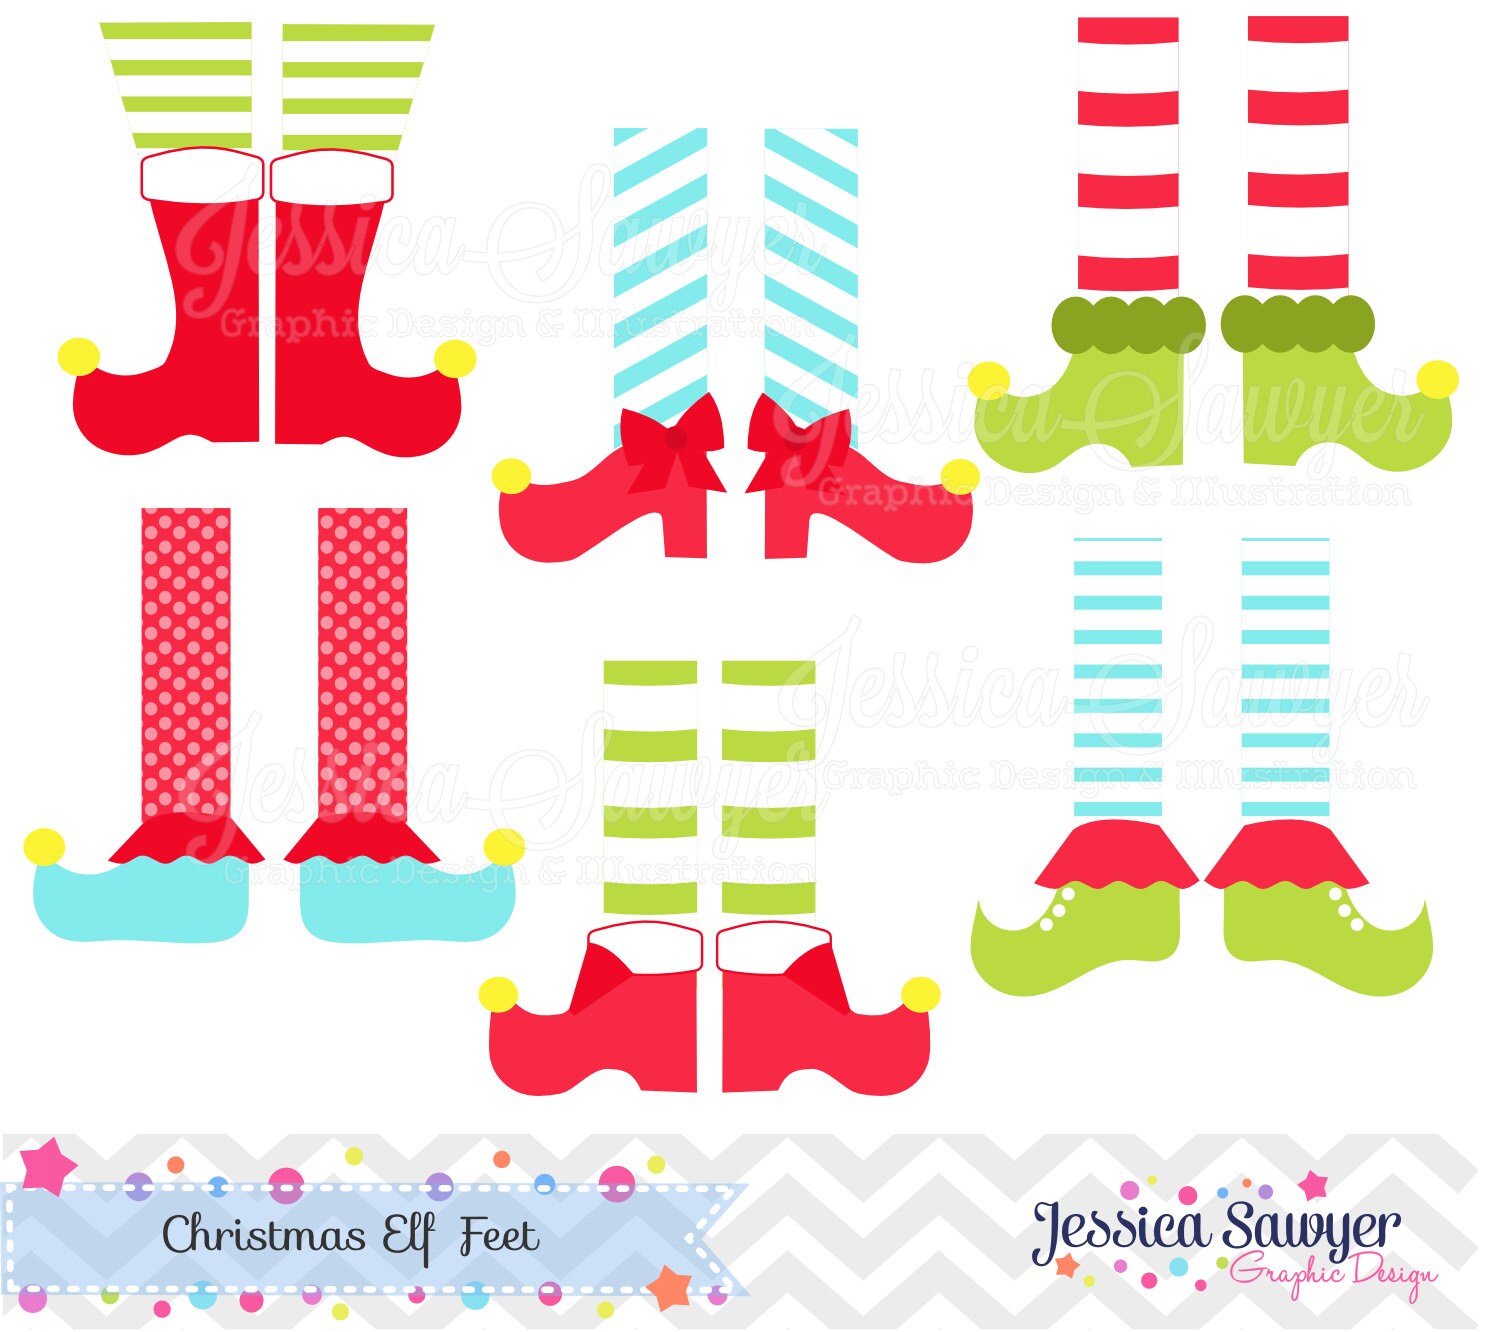 INSTANT DOWNLOAD Elf feet clipart or christmas clipart for